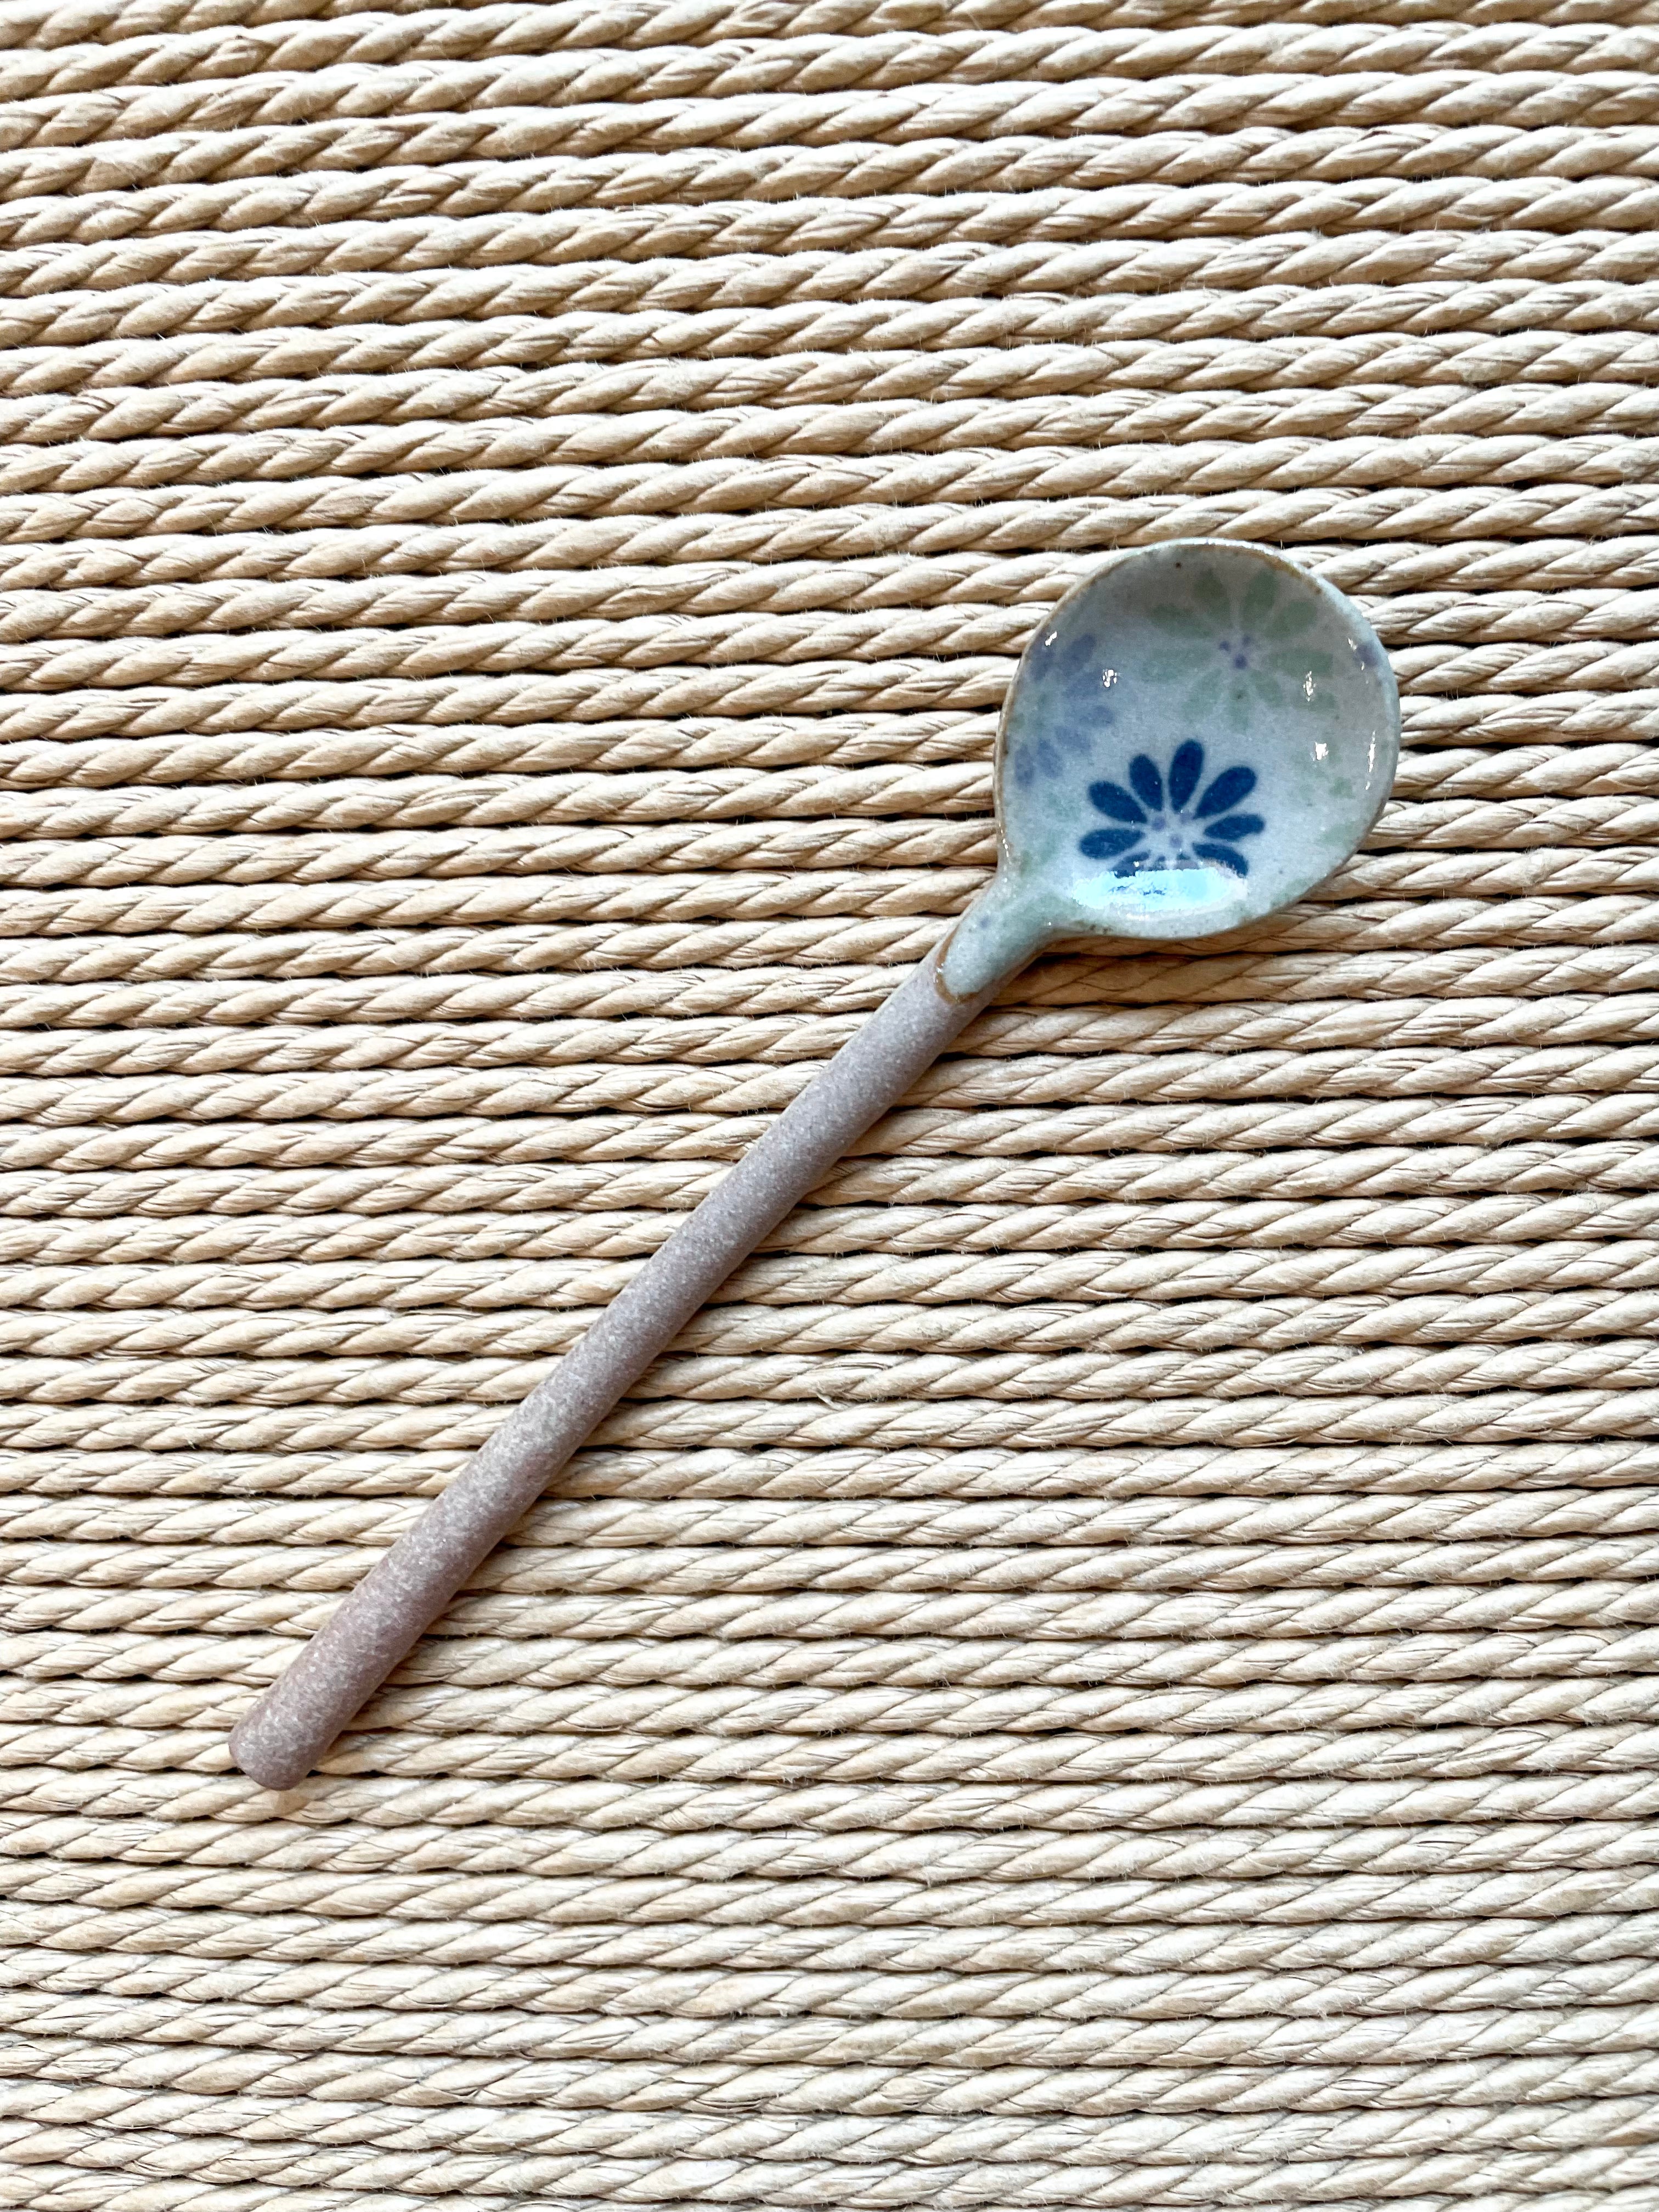 Ceramic spoon with flowers